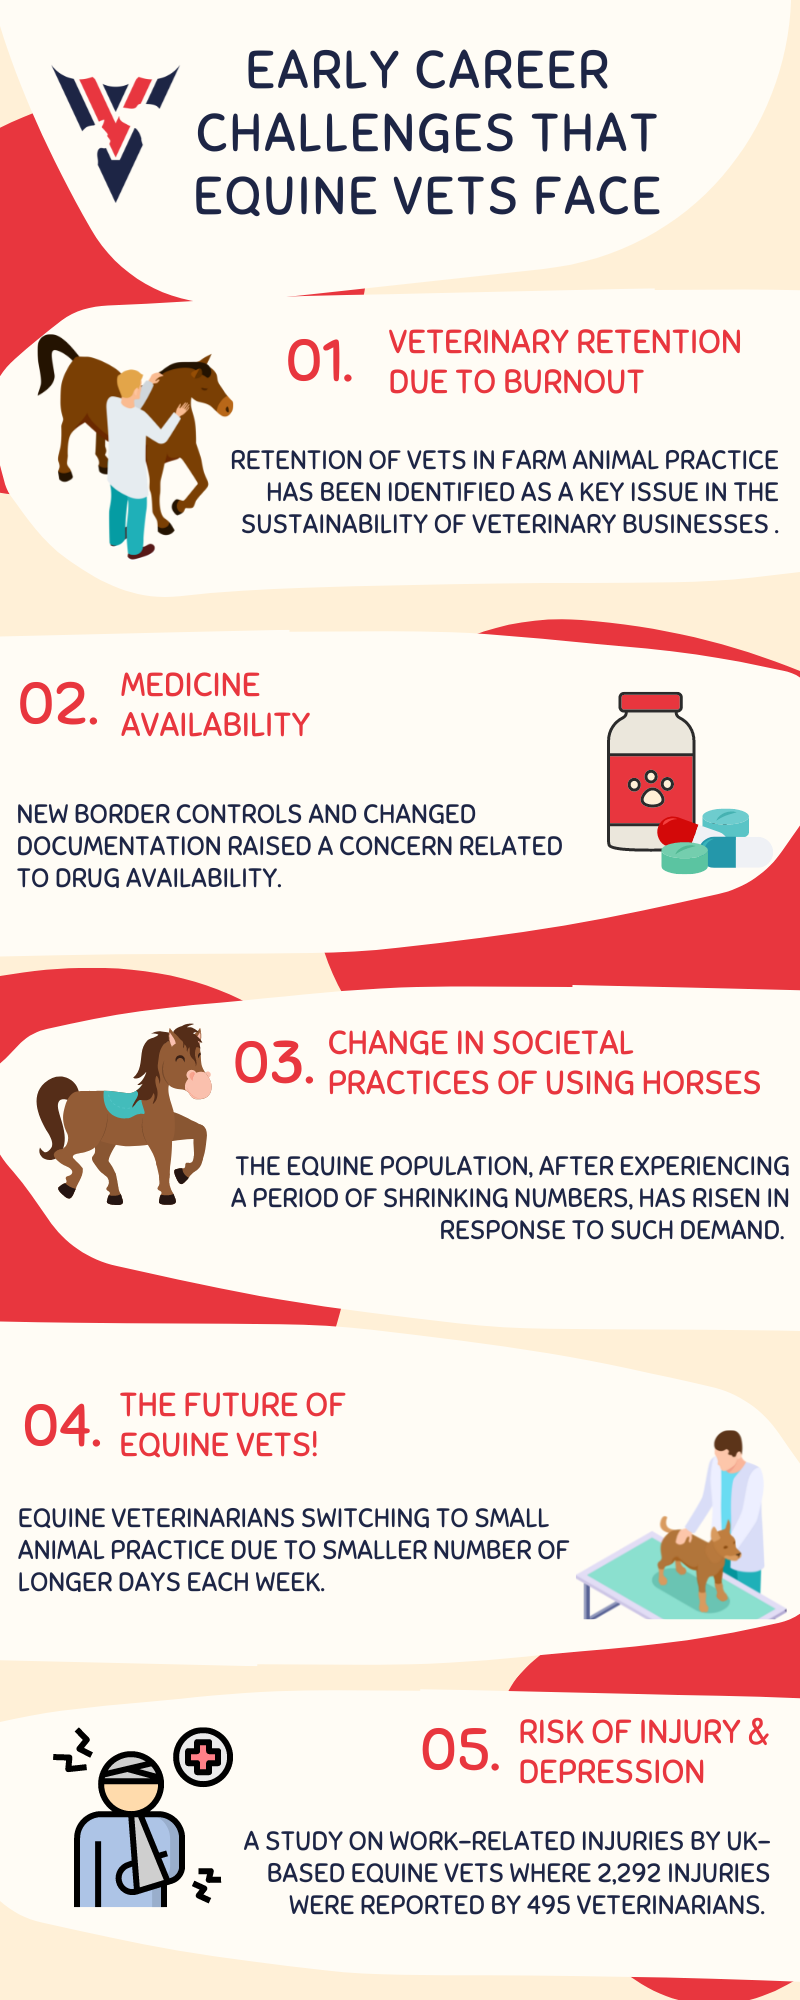 Early Career Challenges That Equine Vets Face